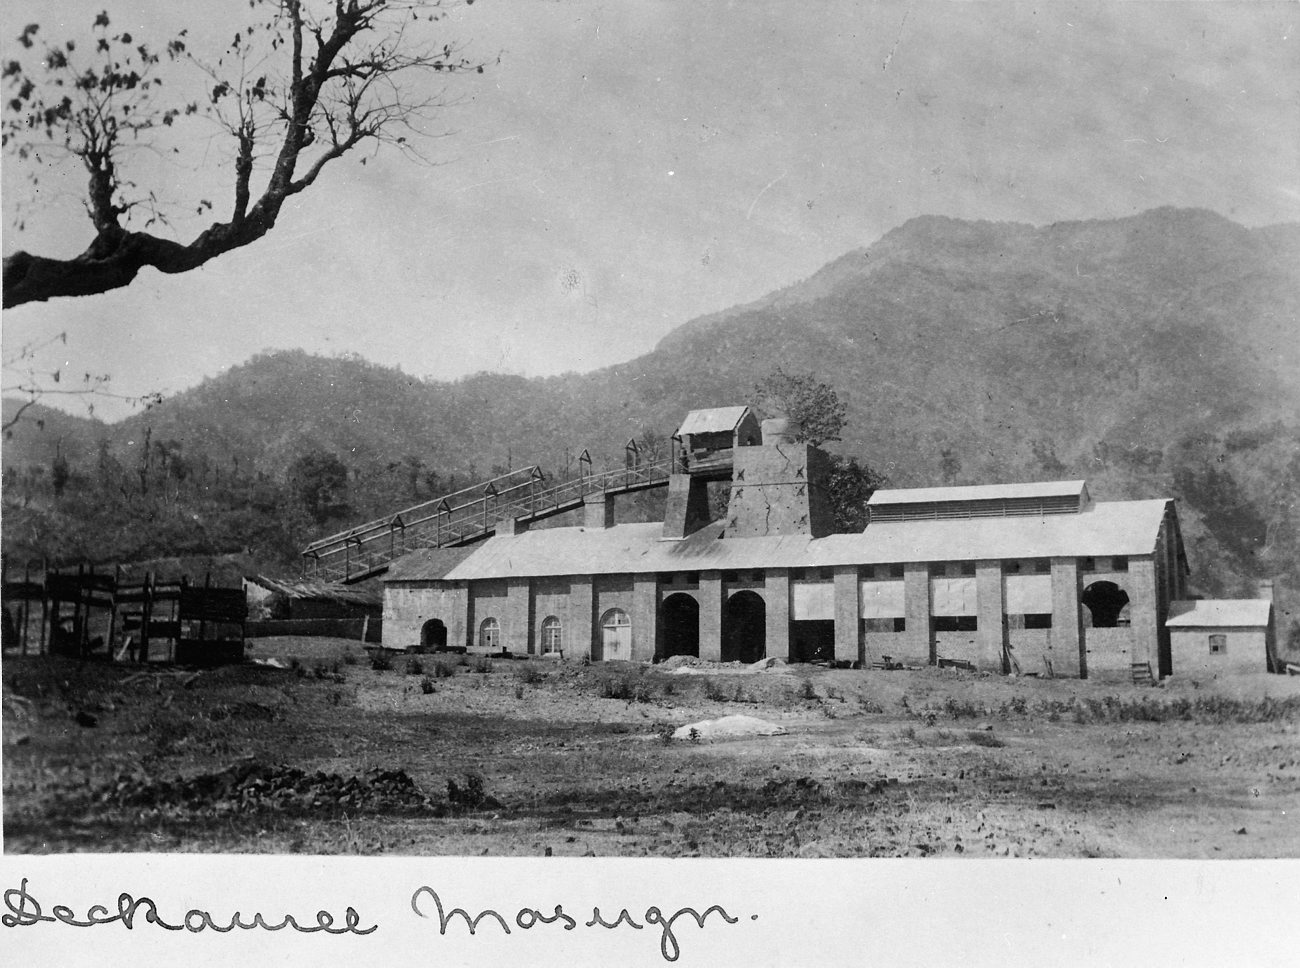 an old building surrounded by trees near mountains